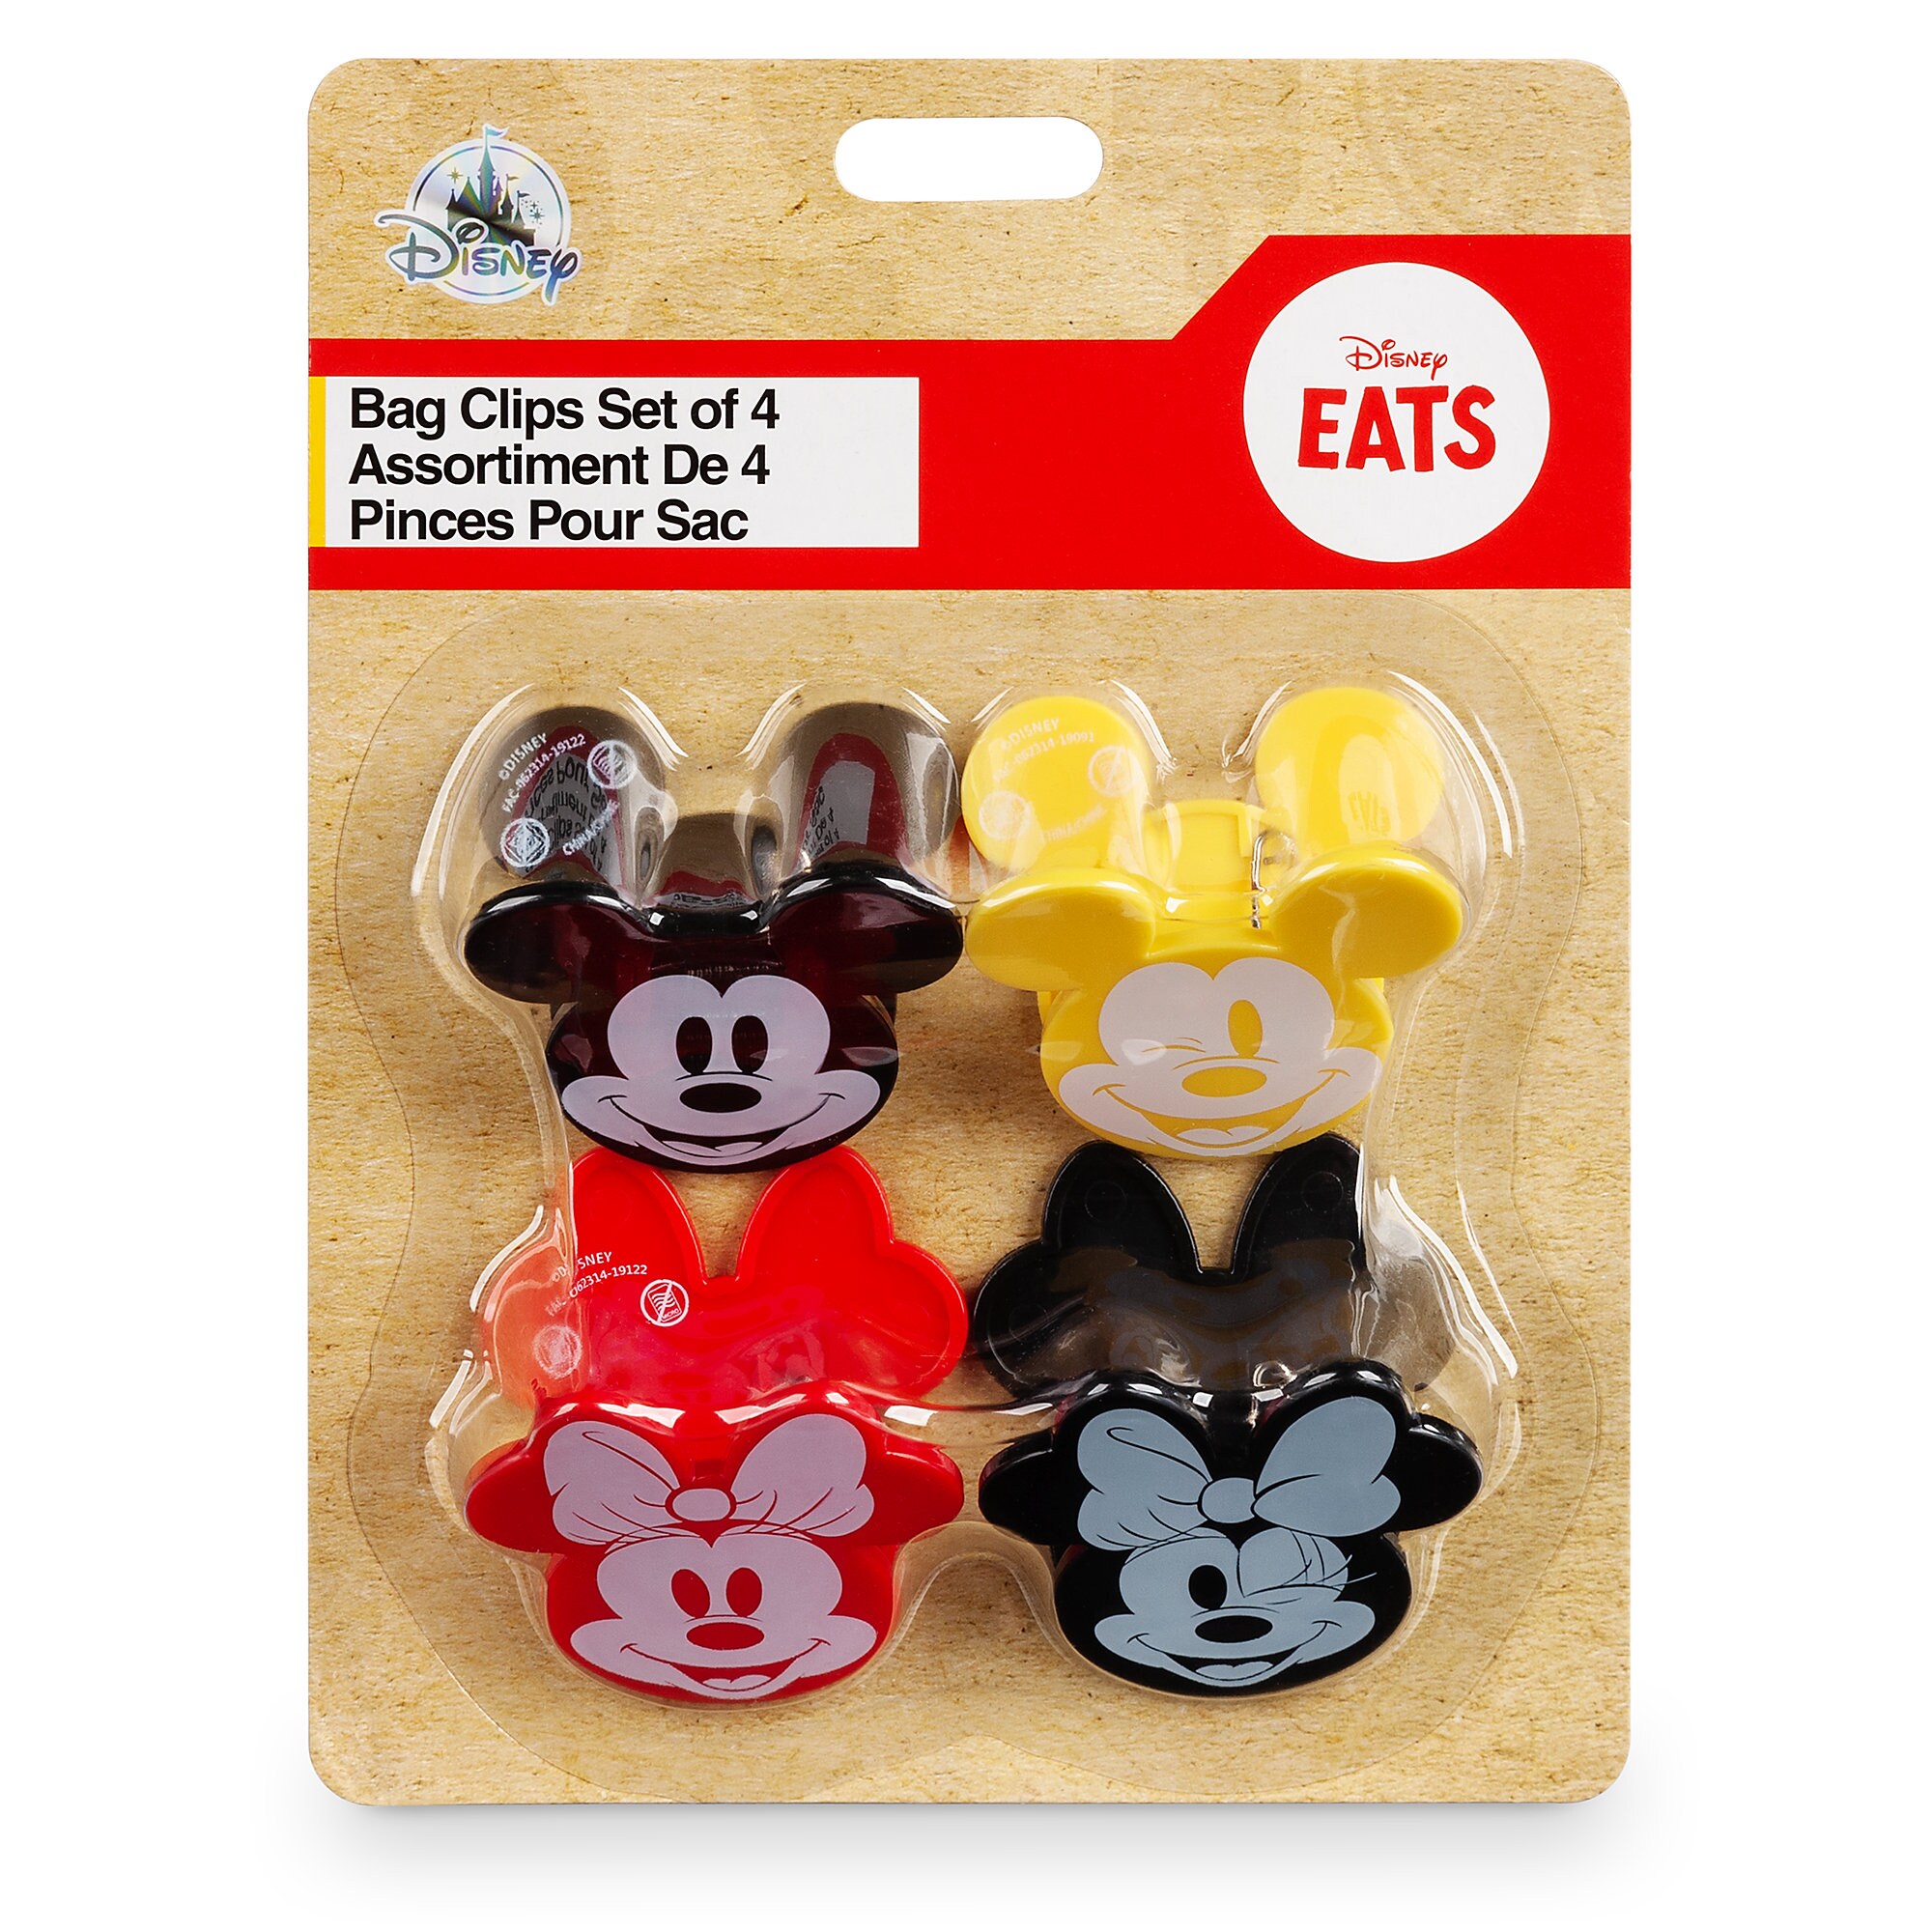 Mickey and Minnie Mouse Bag Clips Set - Disney Eats is now available – Dis Merchandise News